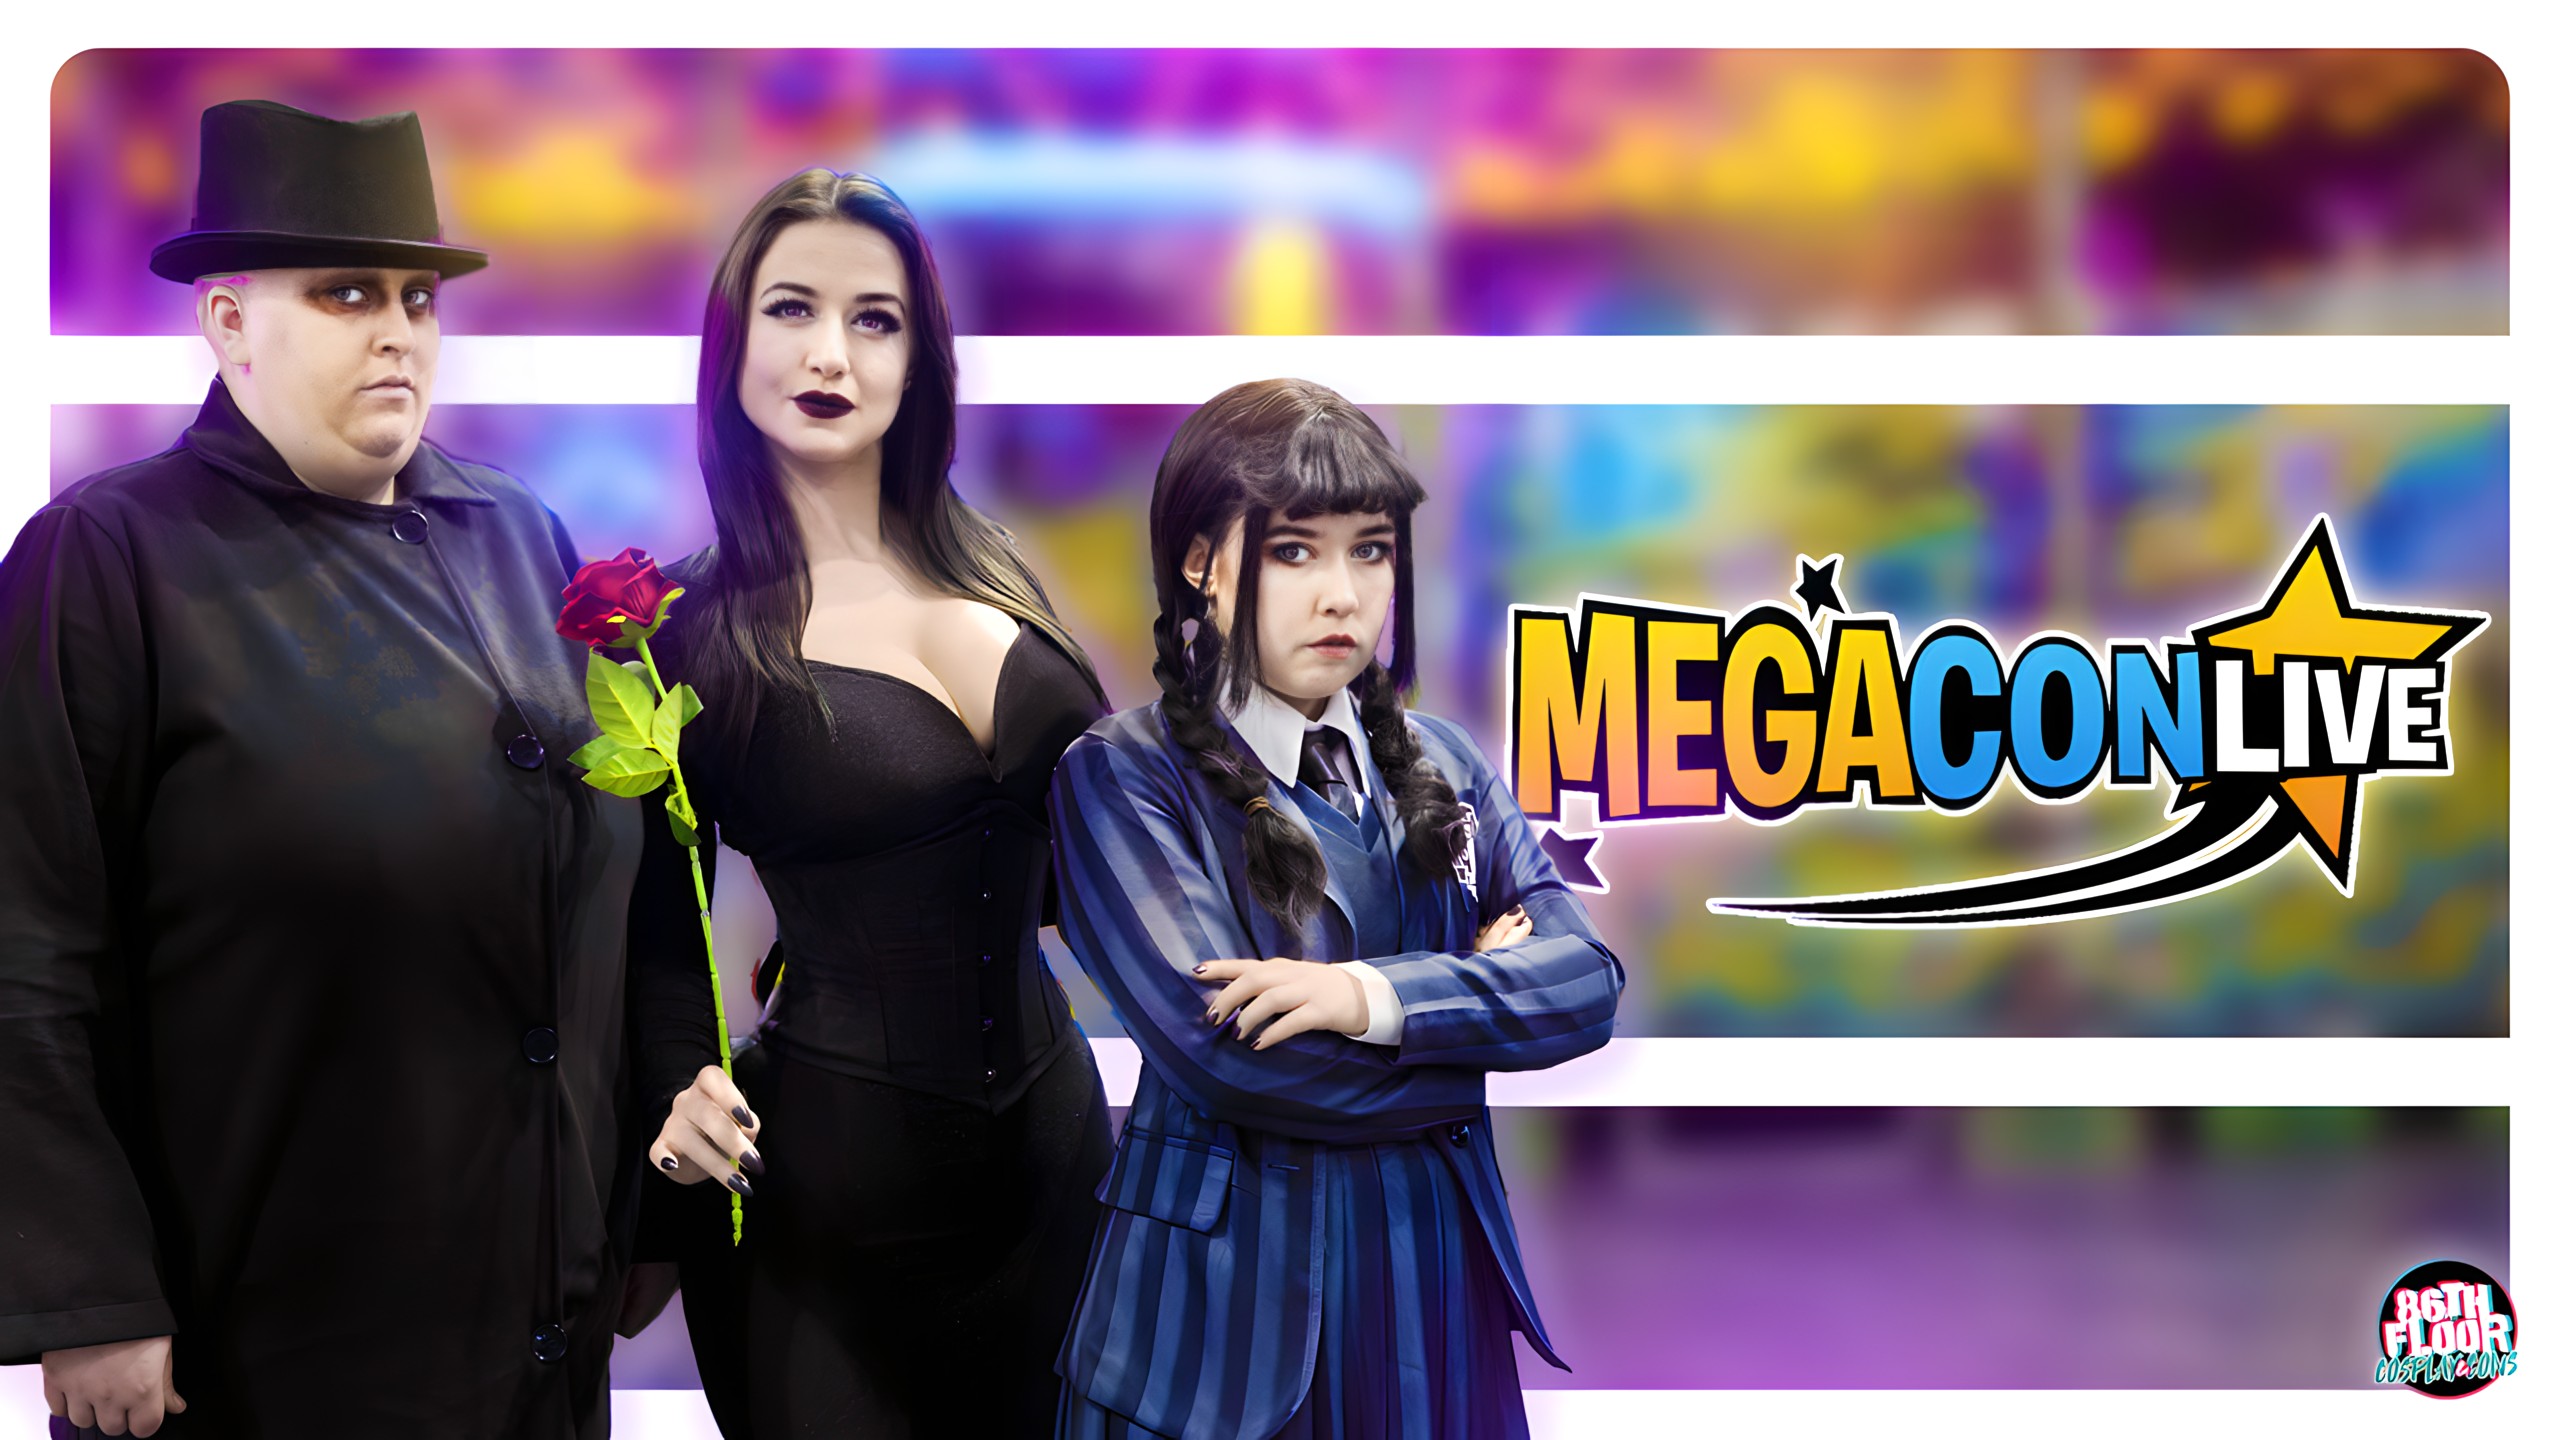 😲 MEGACON LIVE 2023 – Watch our MINDBLOWING NEW Cosplay Music Video ft. Wednesday, My Hero Academia, Miraculous and MORE!